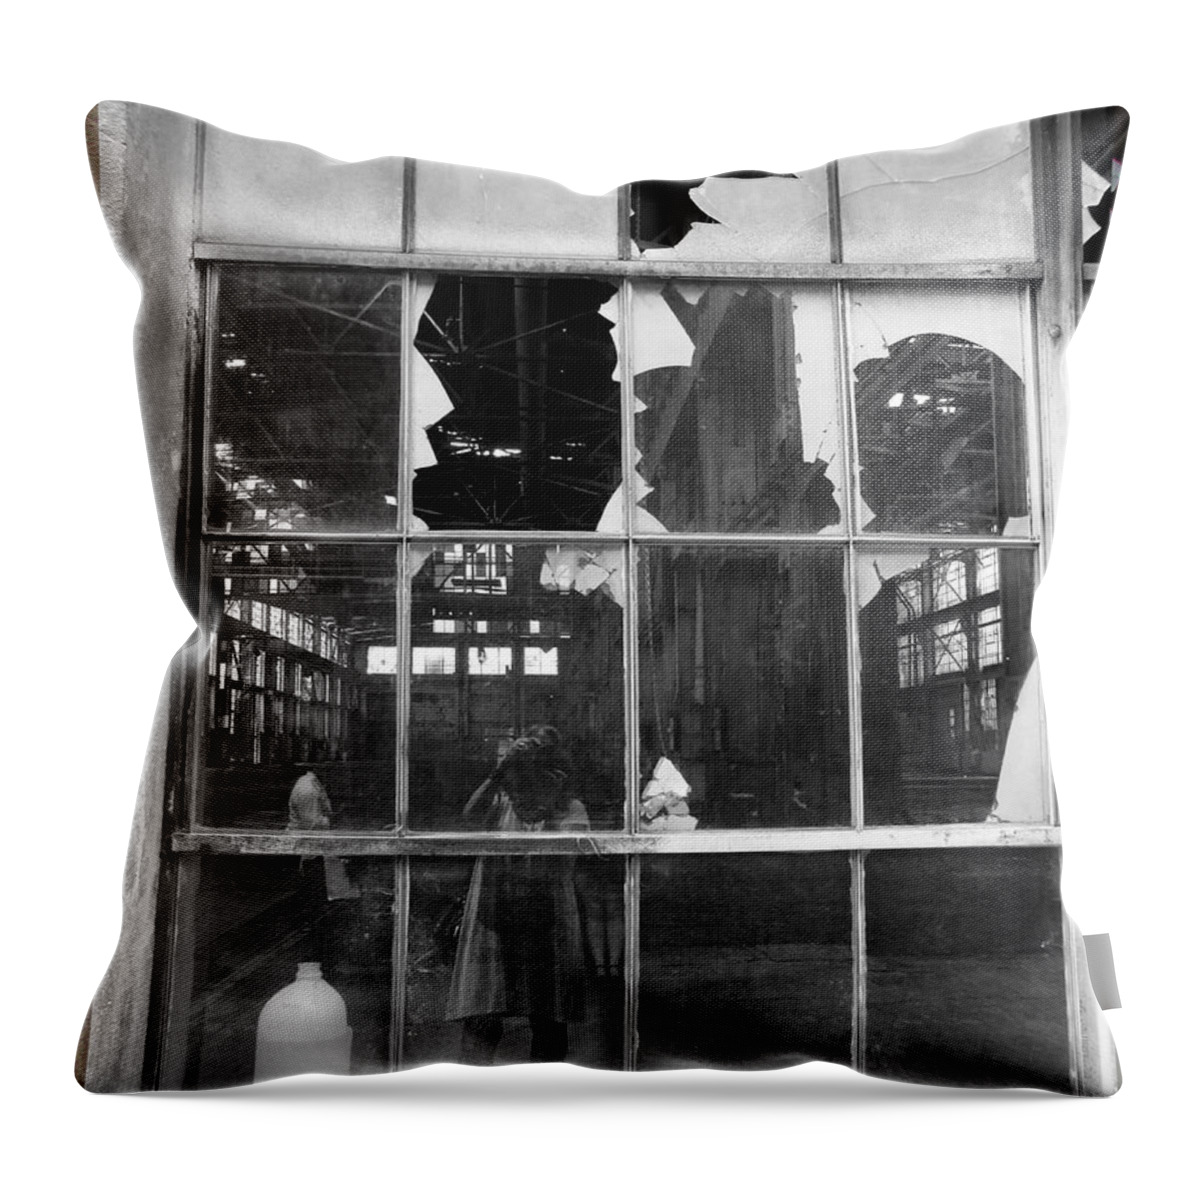  Throw Pillow featuring the photograph Photographer's Window by Feather Redfox